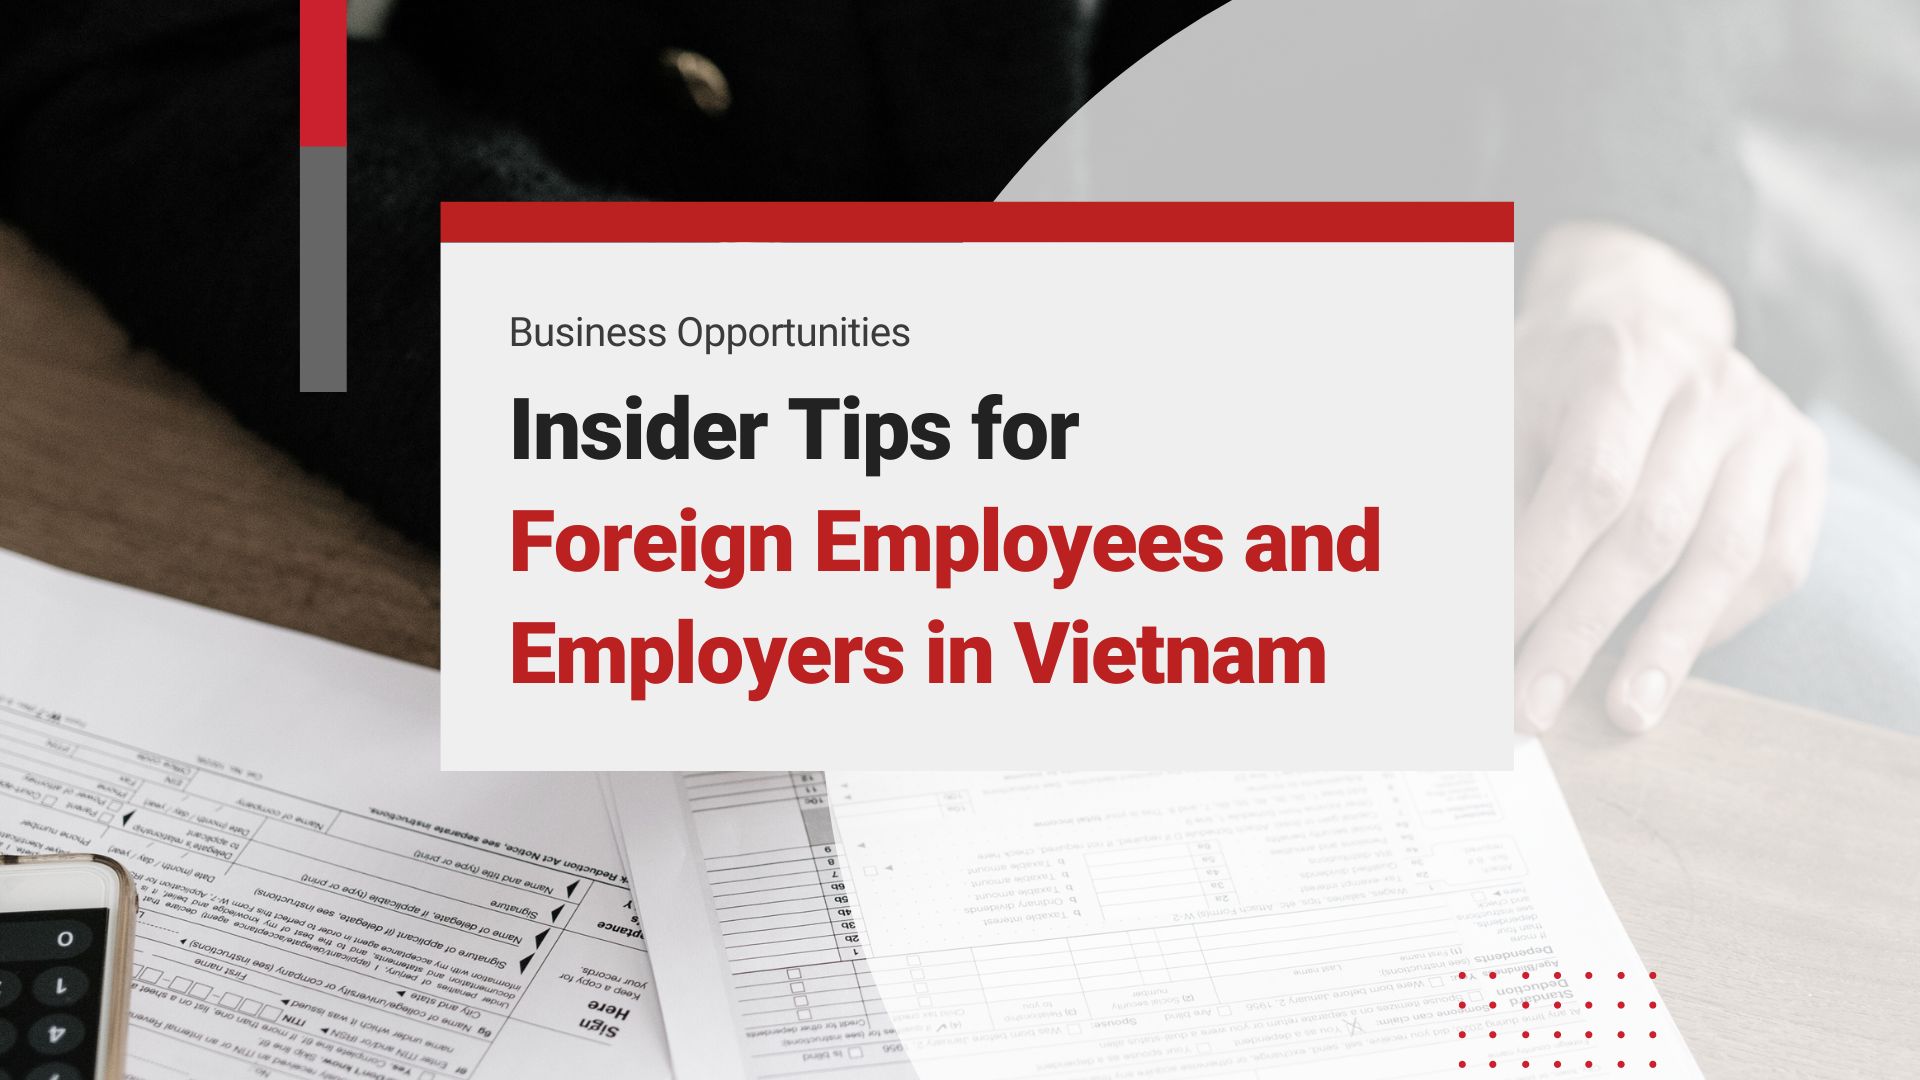 Insider Tips for Foreign Employees and Employers in Vietnam